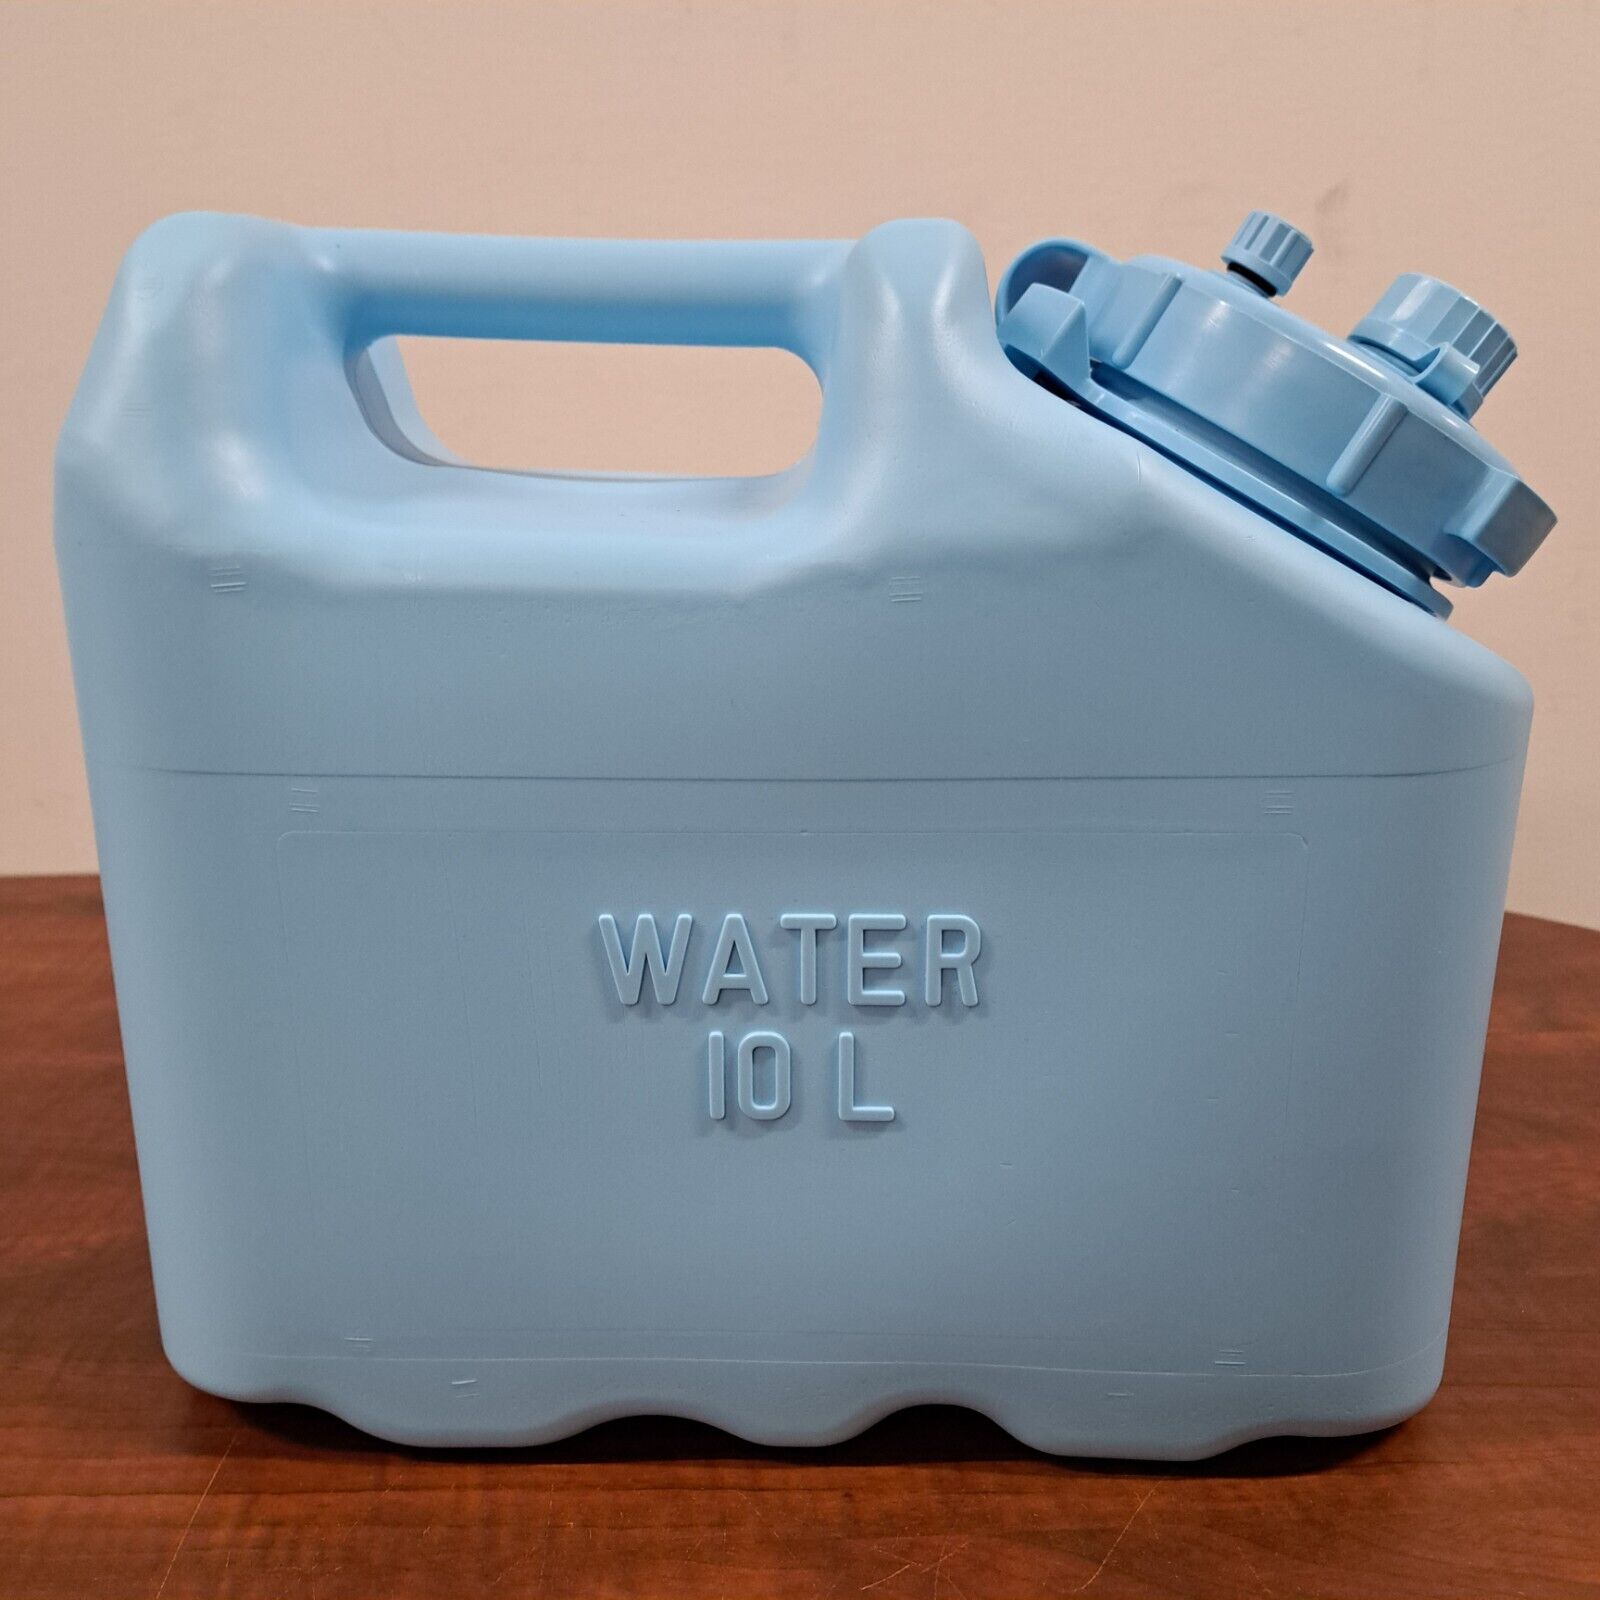 Genuine Scepter 2.5 Gallon Military BPA Free Water Container, 10 Litres Blue